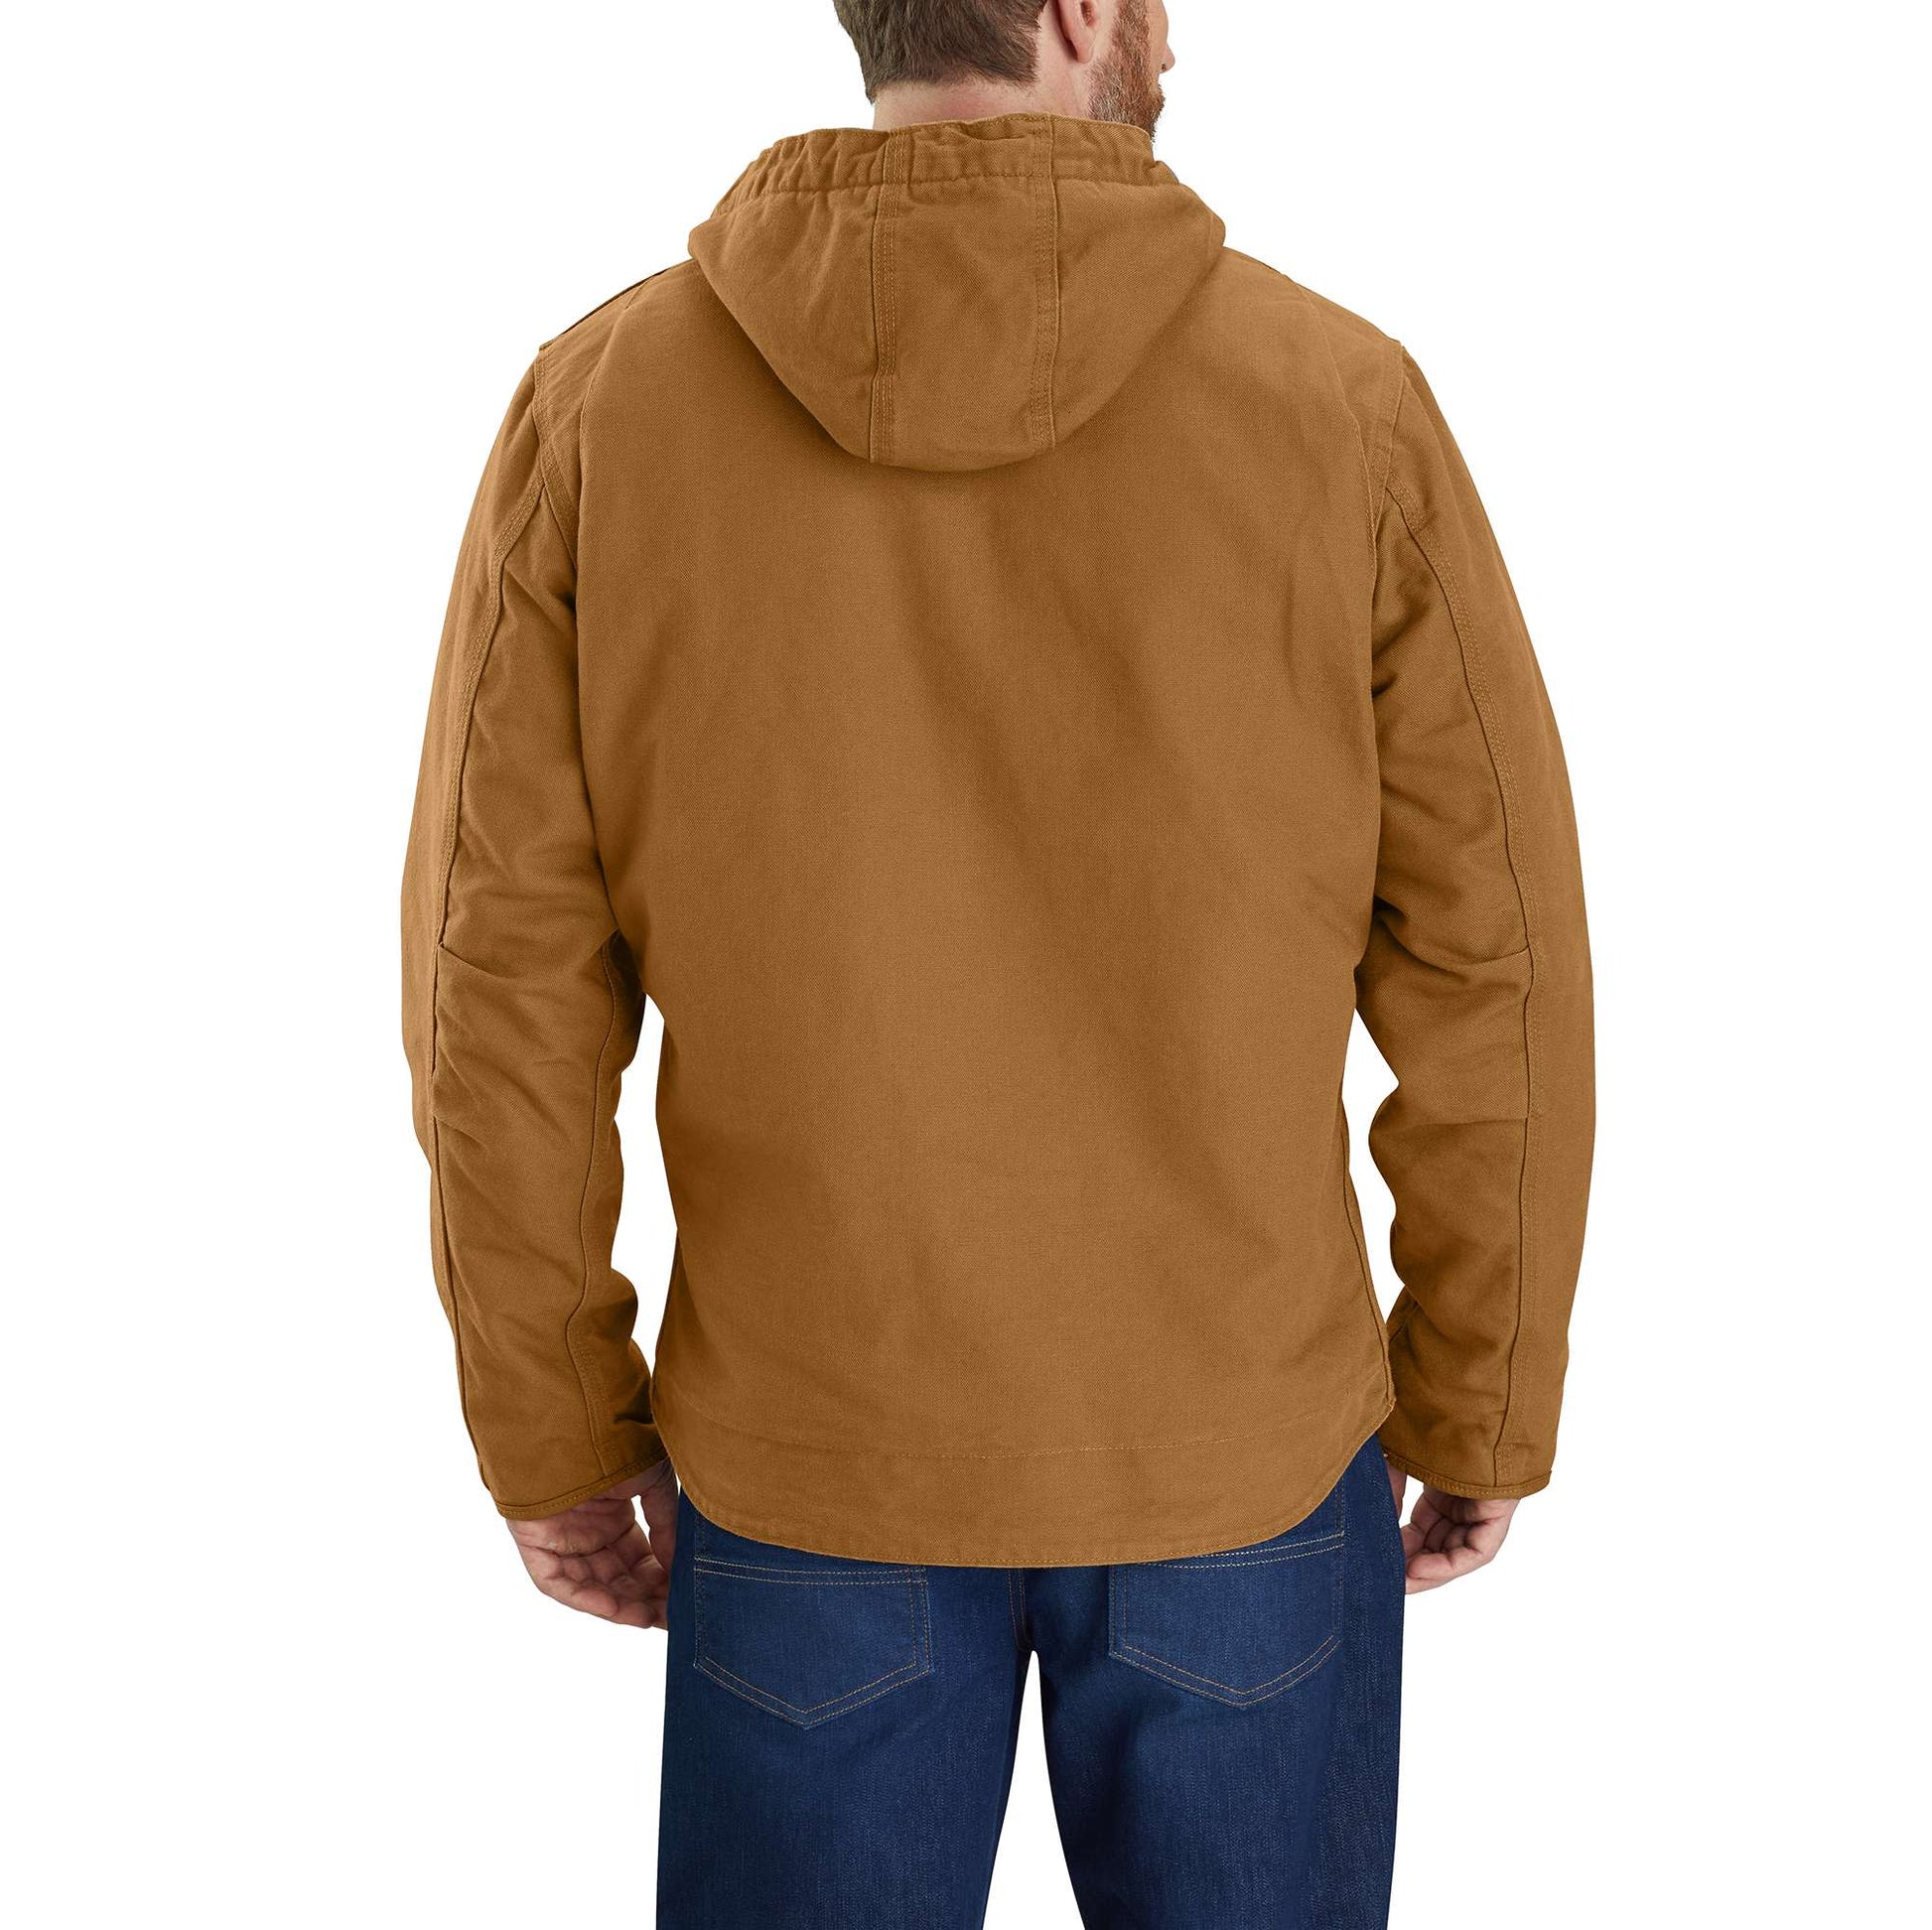 Carhartt Men's Relaxed Fit Washed Duck Sherpa-Lined Utility Jacket